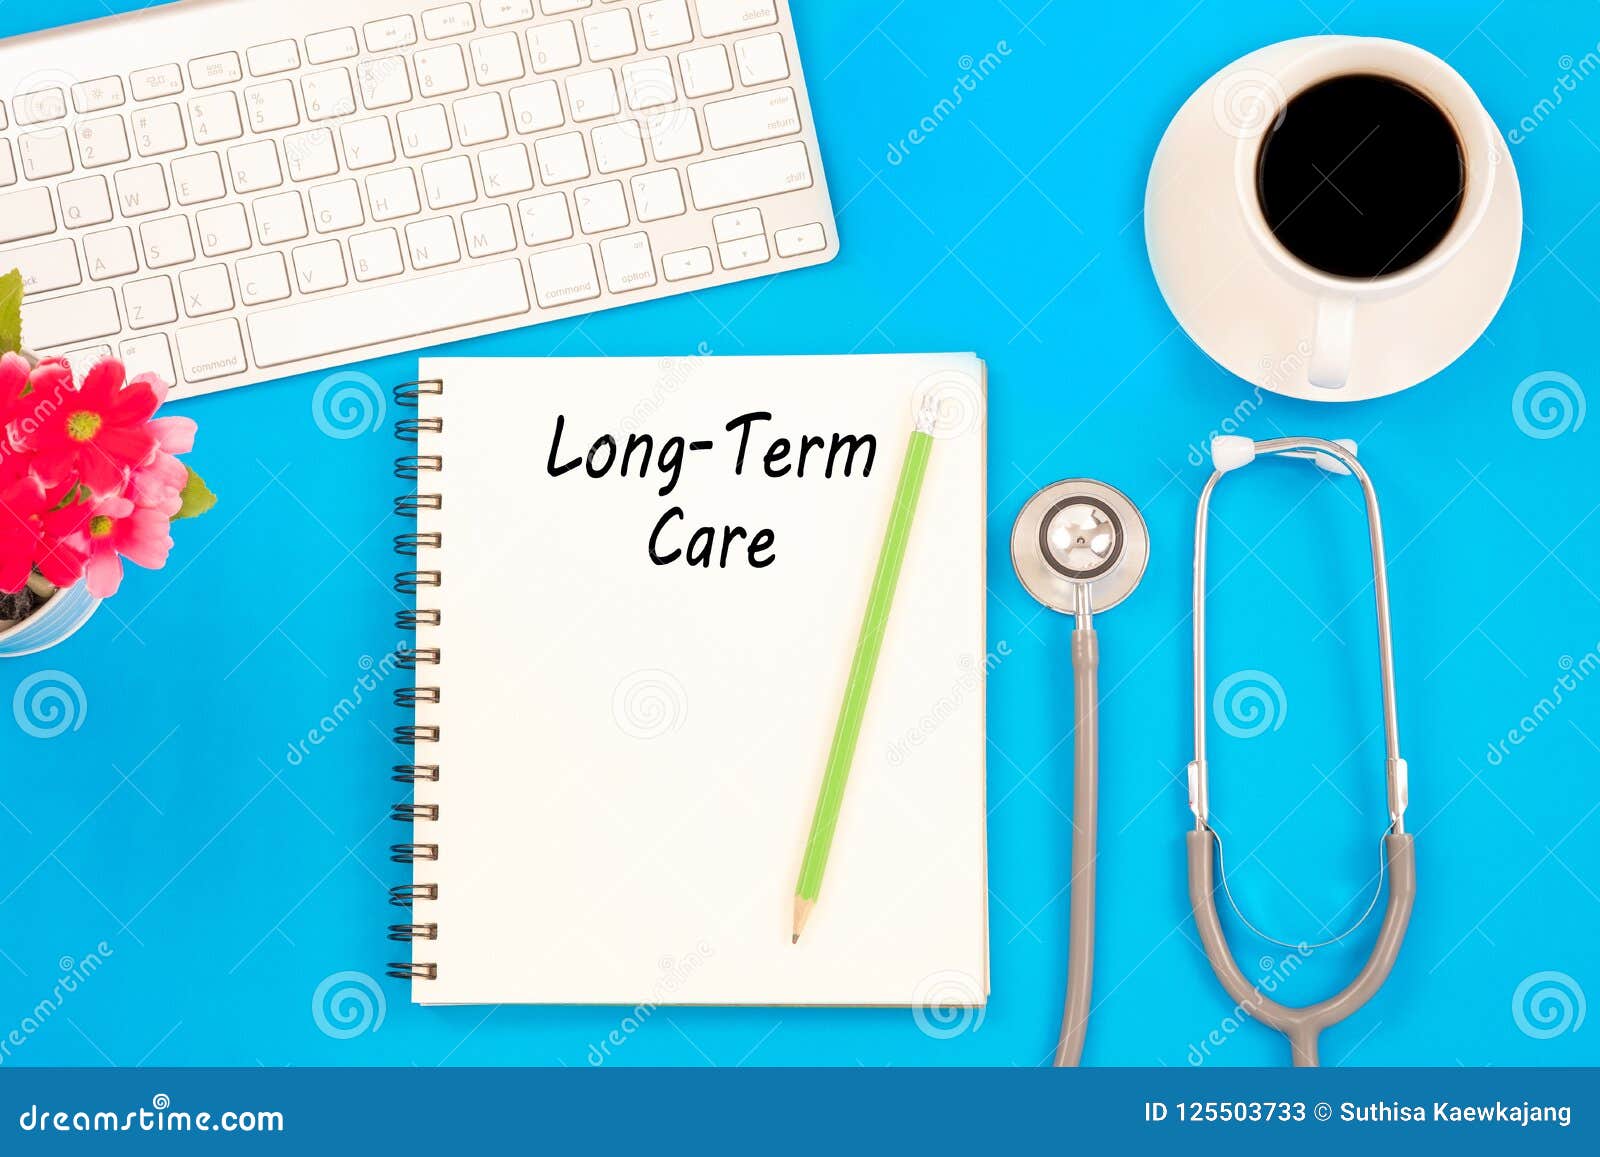 stethoscope on notebook and pencil with long term care words as